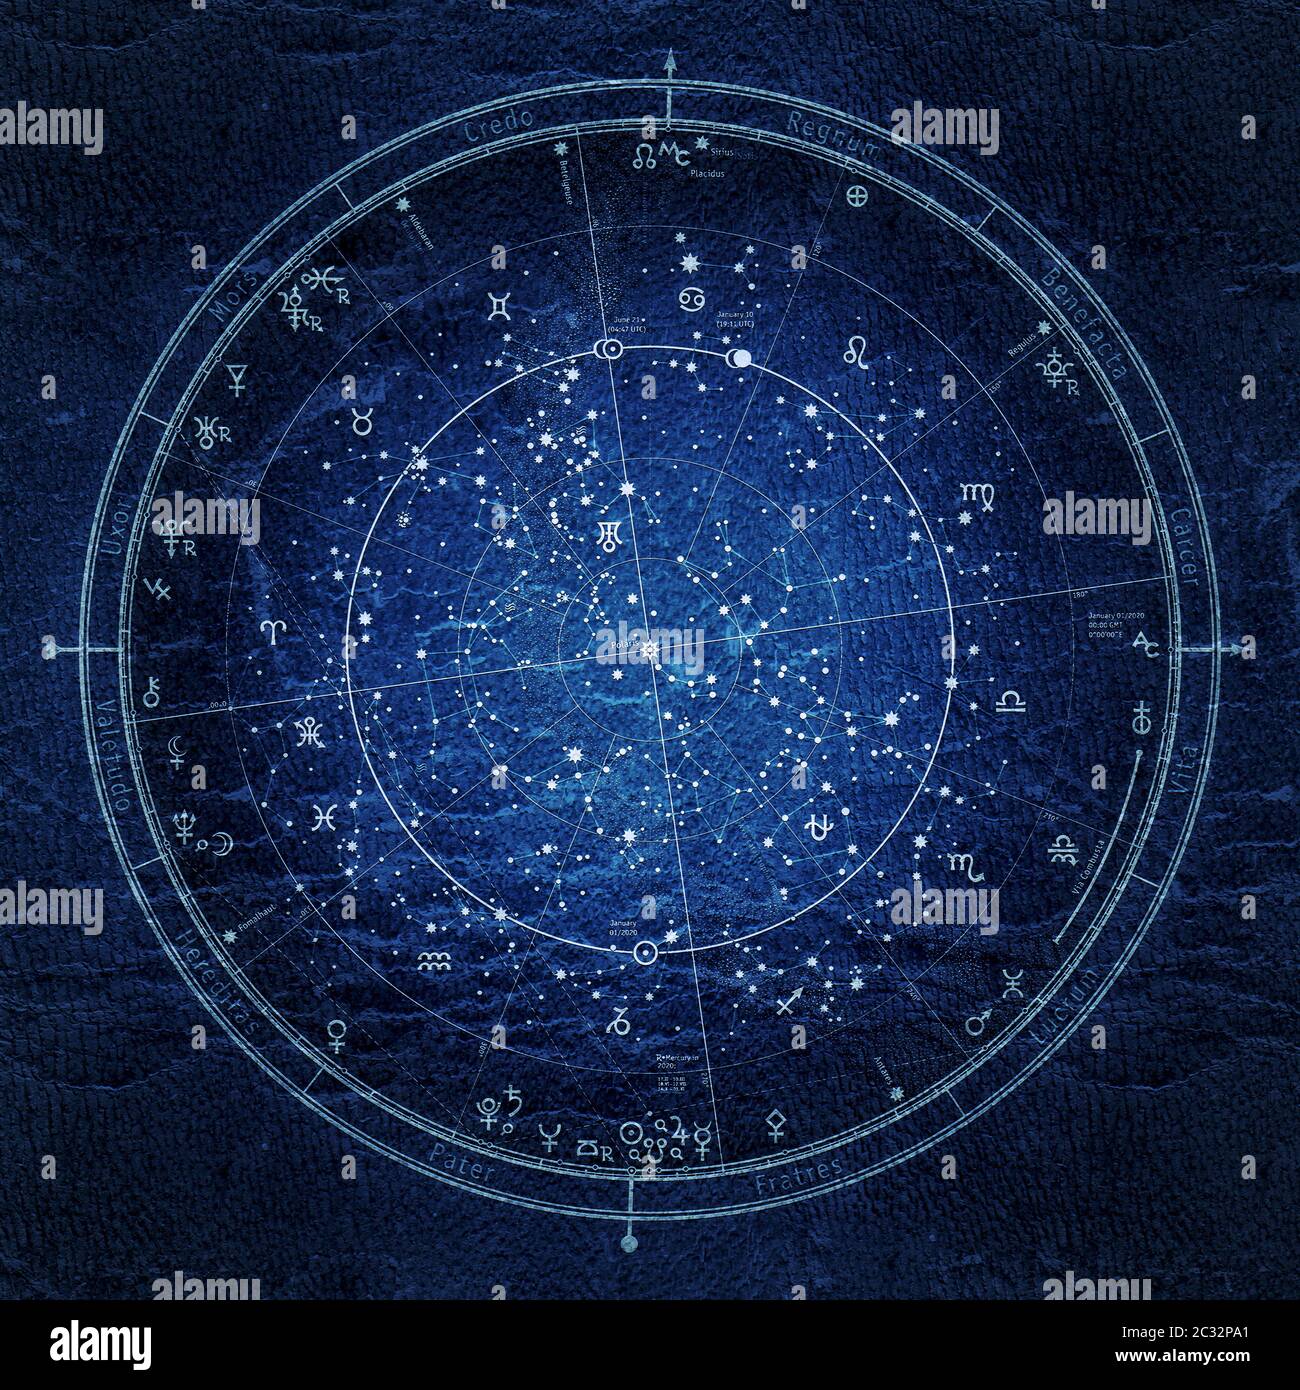 Astrological Celestial Map of The Northern Hemisphere. The General Global Universal Horoscope on Jan Stock Photo